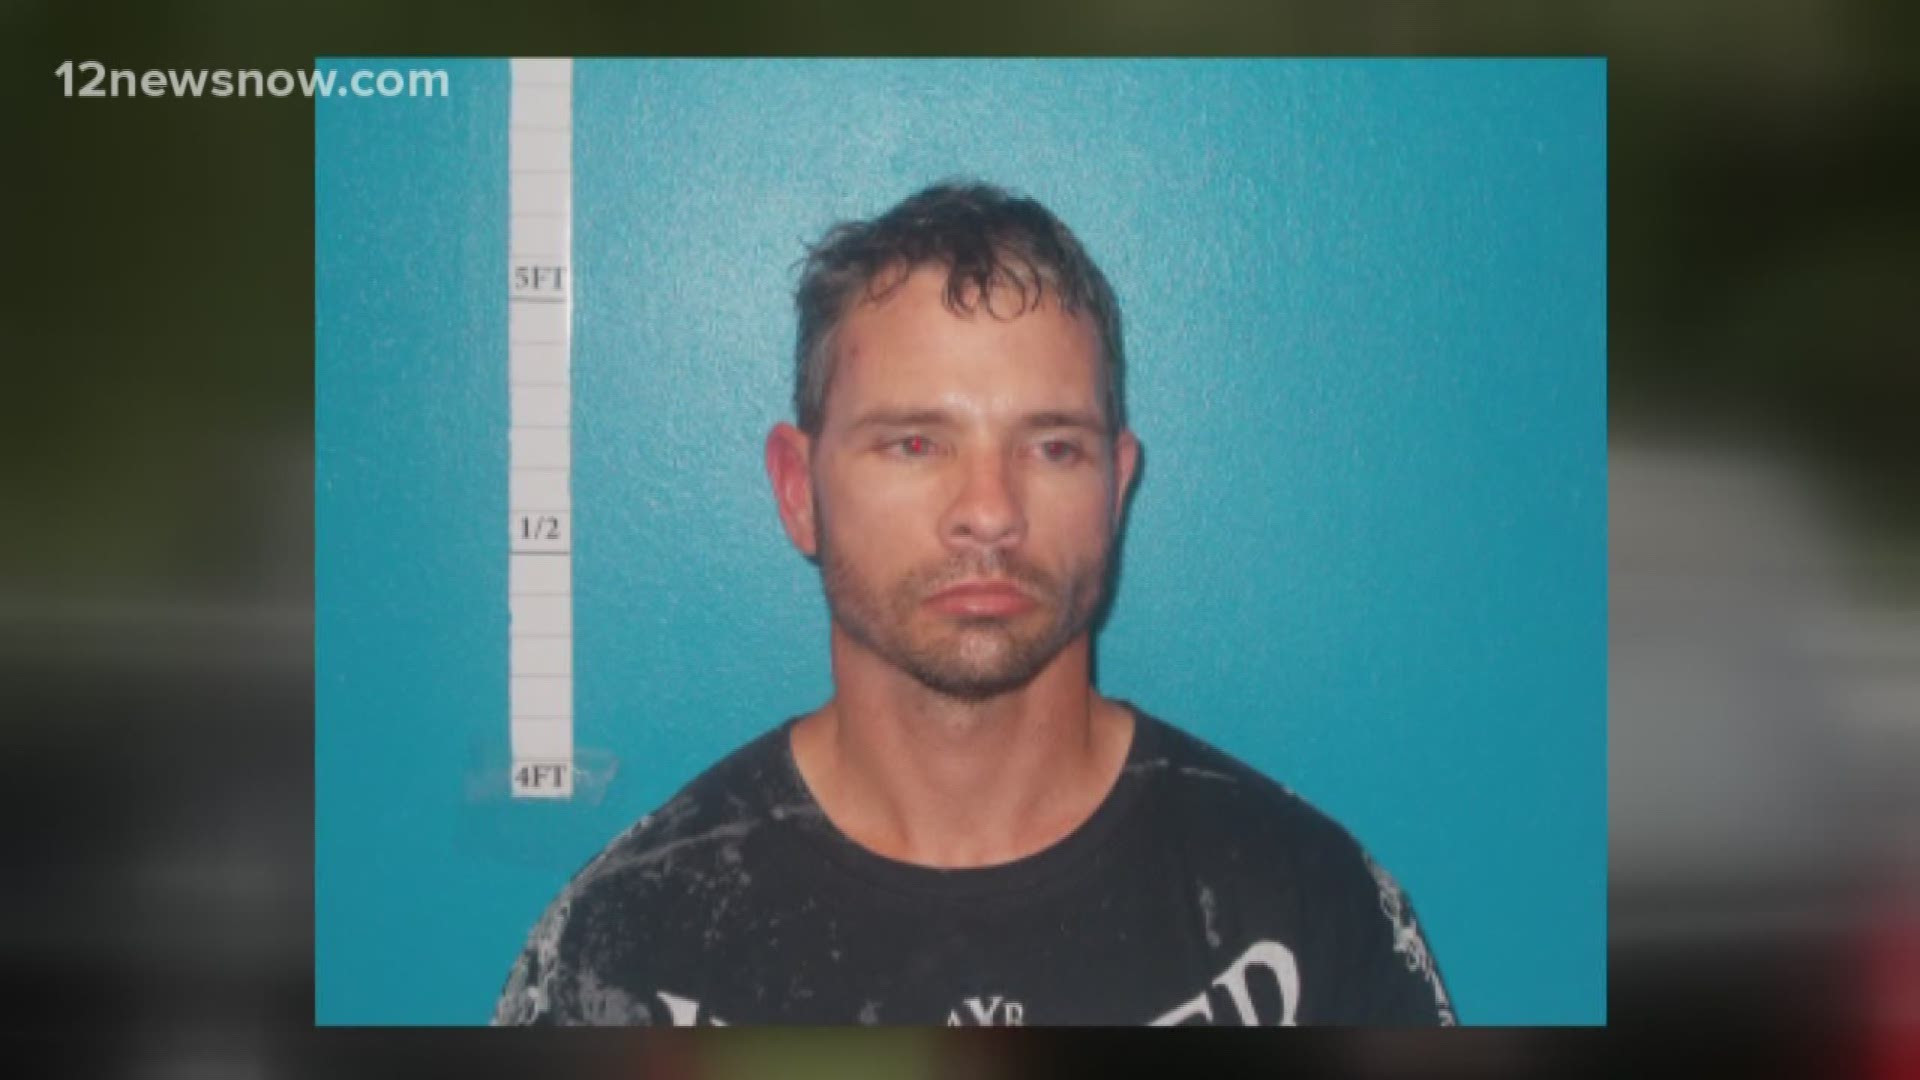 Sheriff Davis said Joshua Conner came toward the deputy with a knife and large stick.